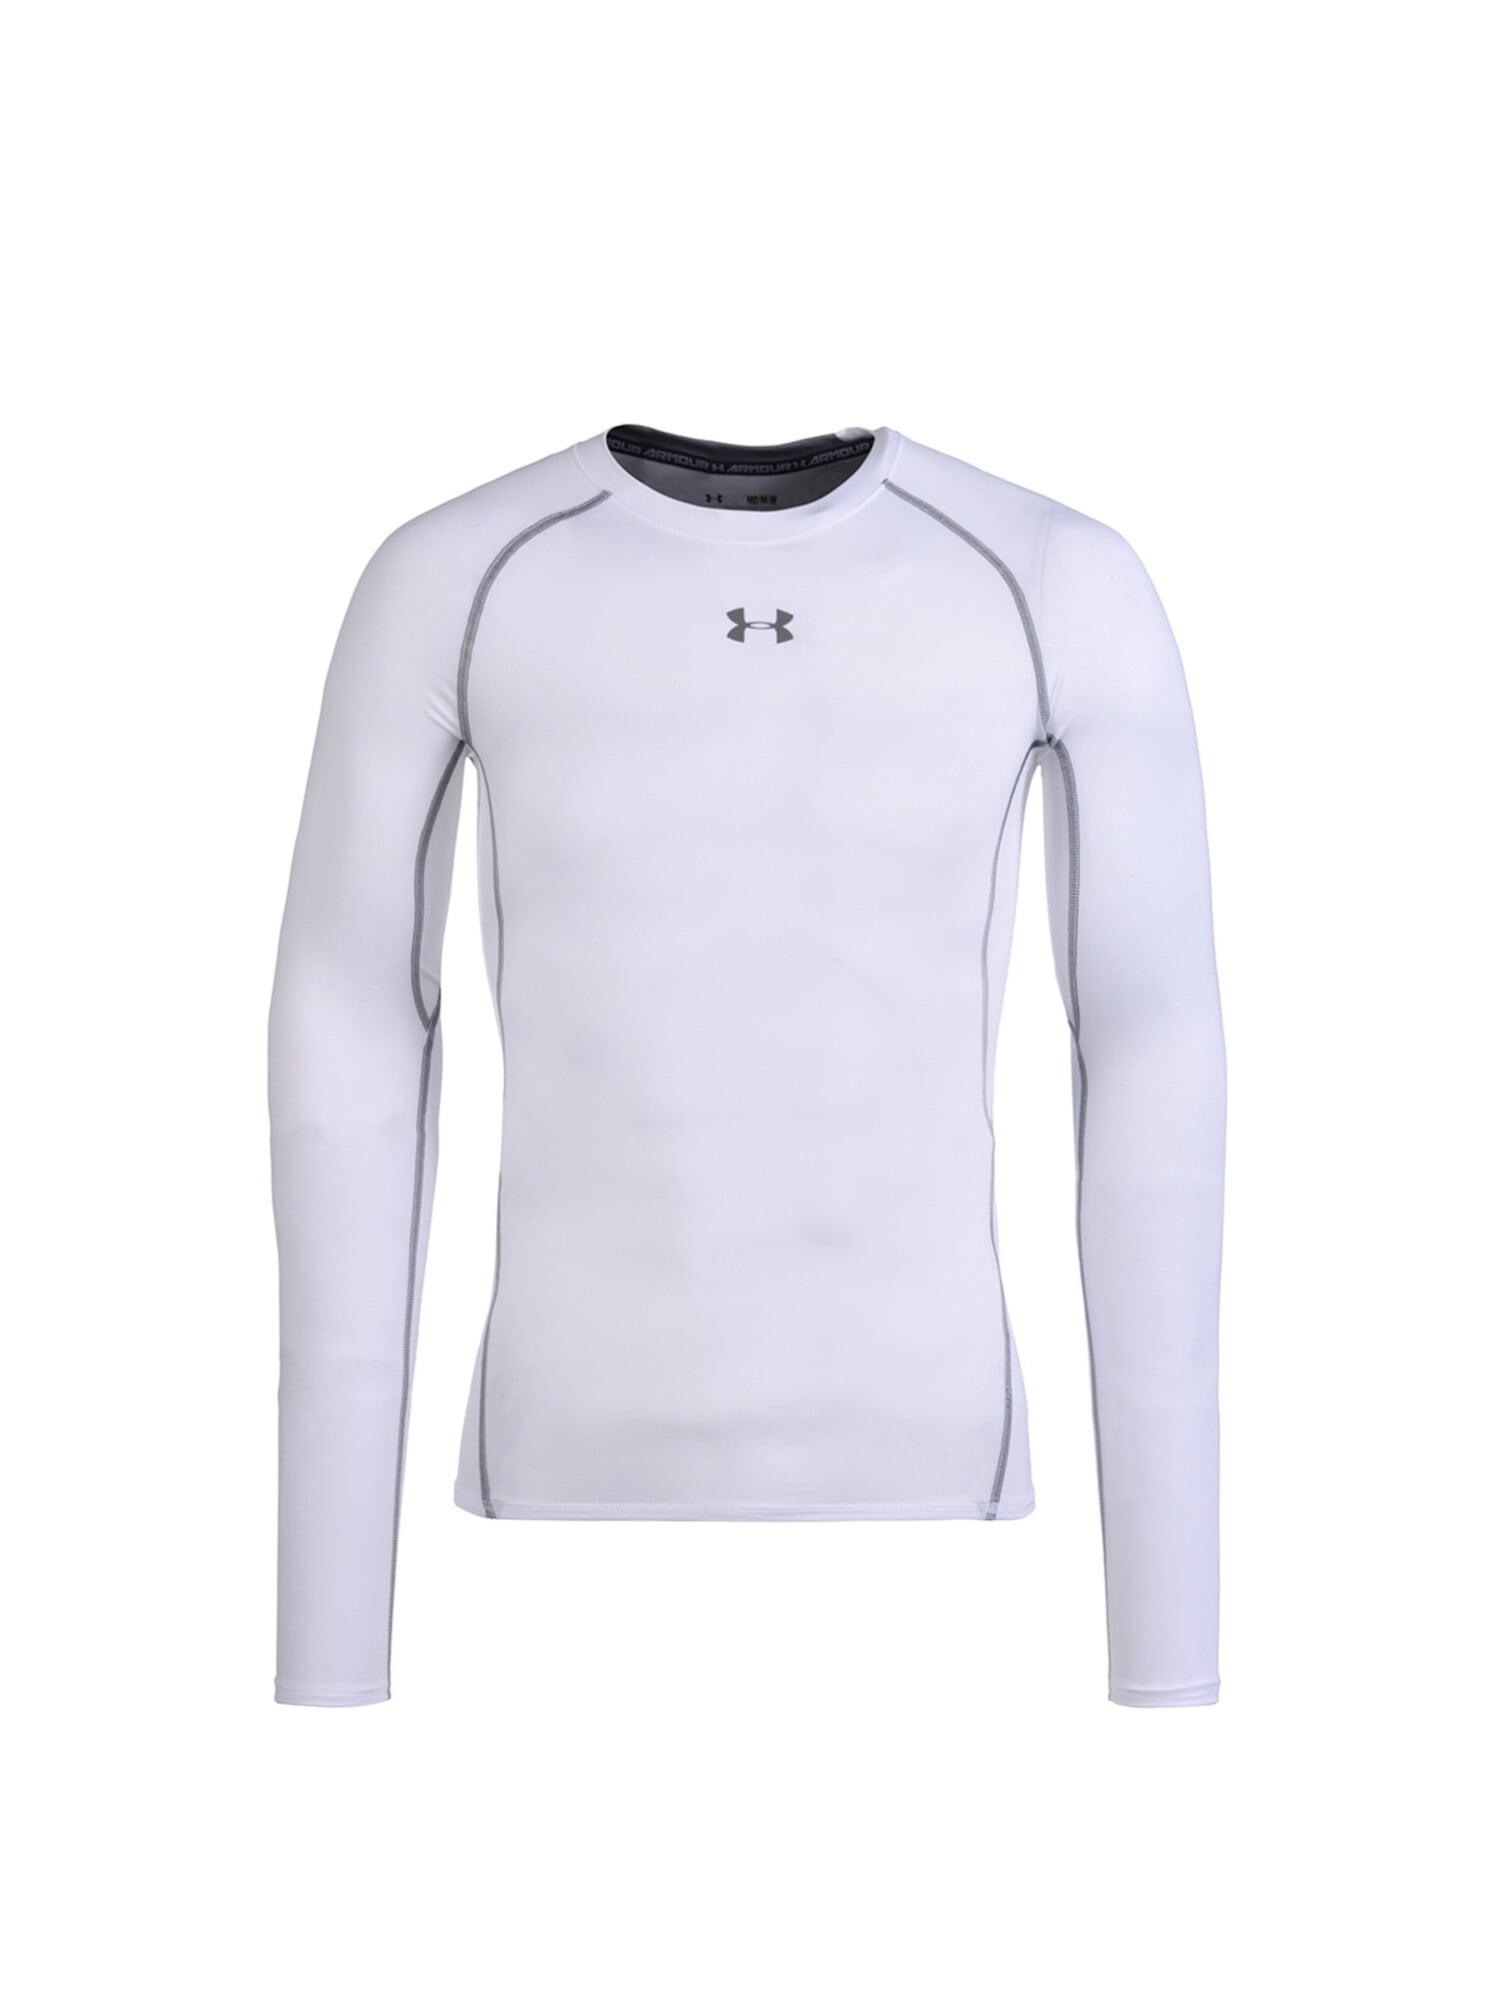 UNDER ARMOUR Mens White Slim Fit Casual Shirt 3XL 